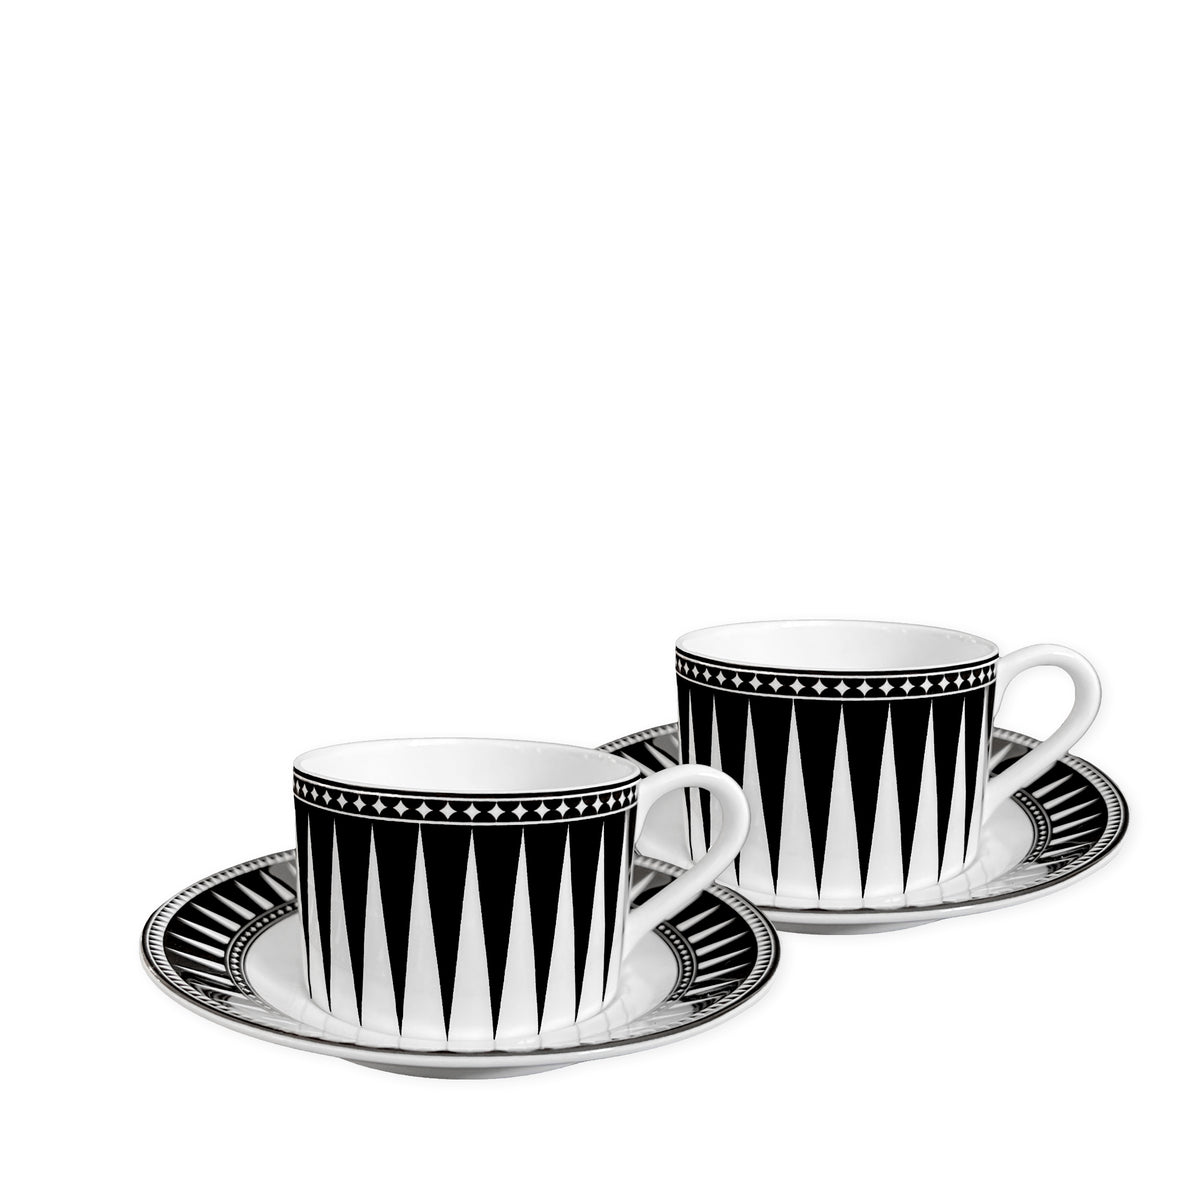 Marrakech Teacup and Saucer Set of 2 in black and white bone china from Caskata